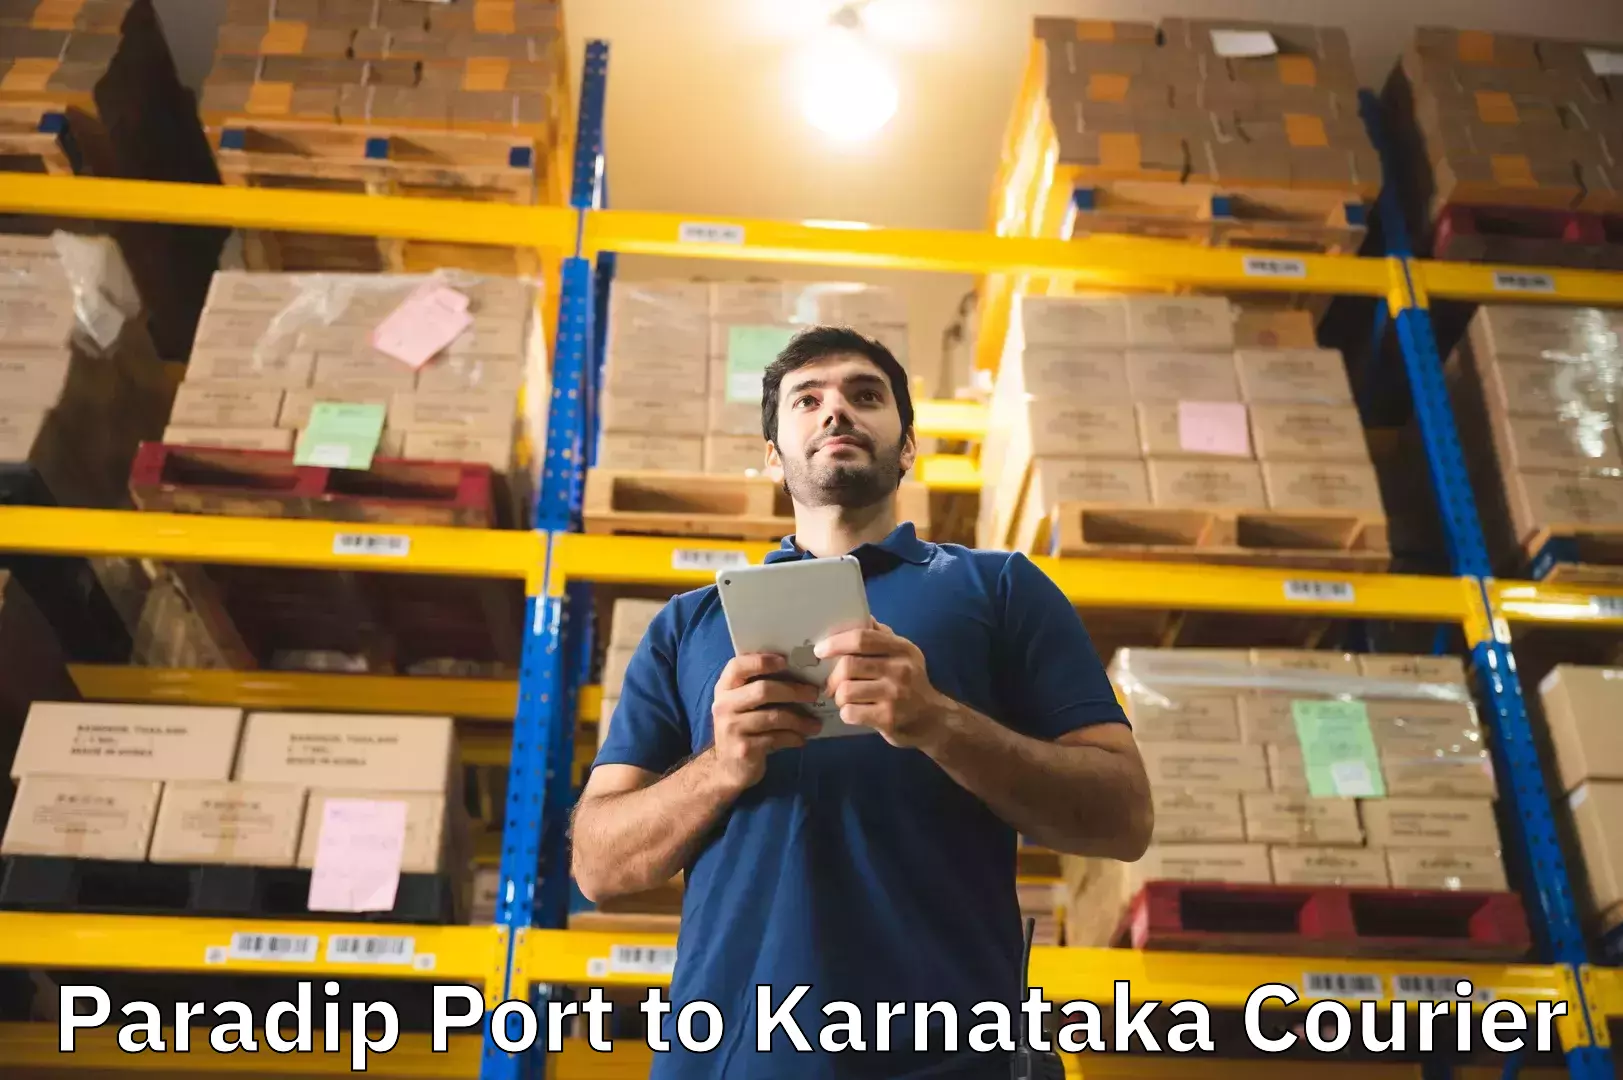 Luggage shipment tracking Paradip Port to Manipal